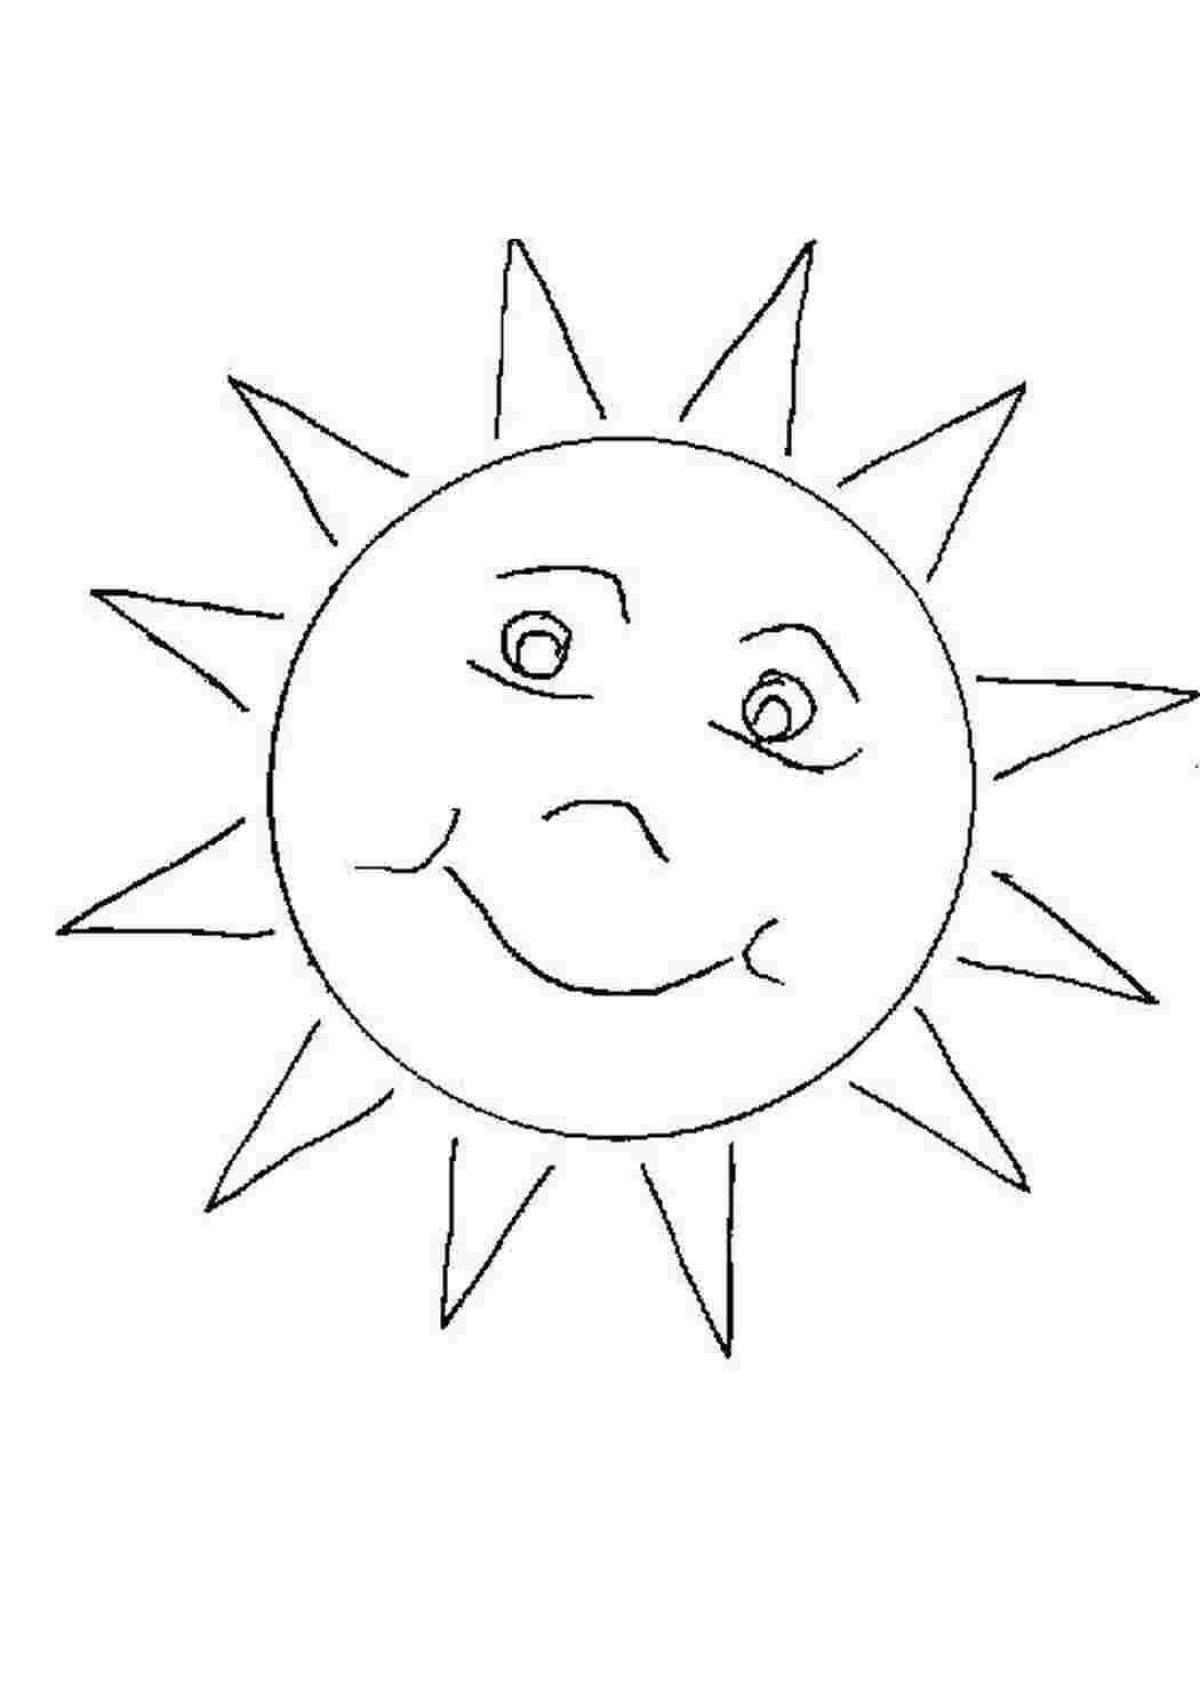 Playful carnival sun coloring page